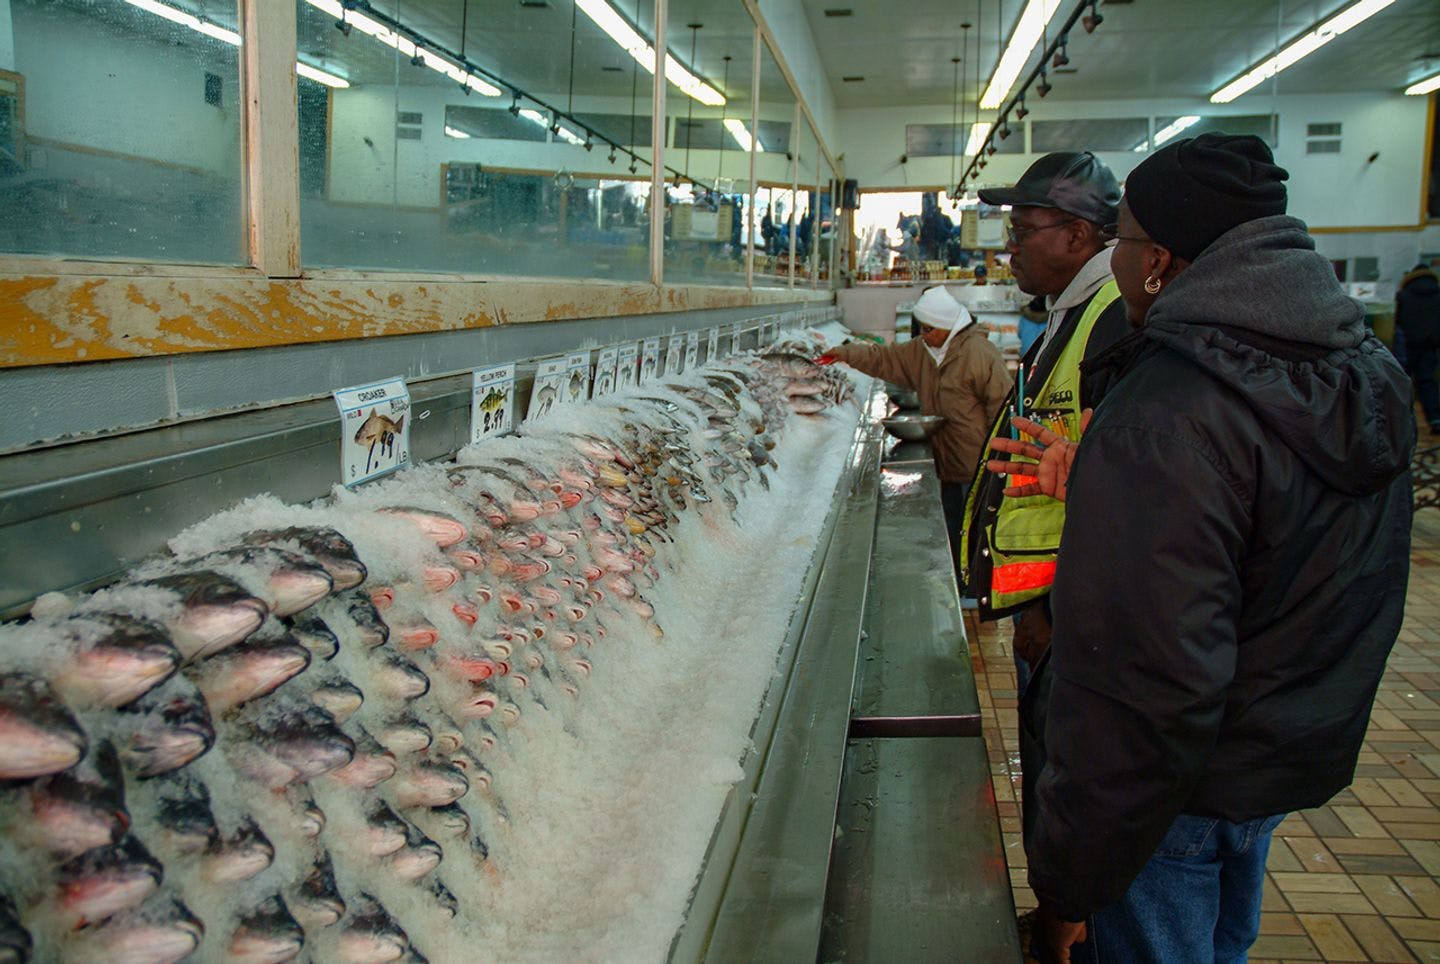 New York is much more than Manhattan. This photo was taken at a fish market in Harlem.